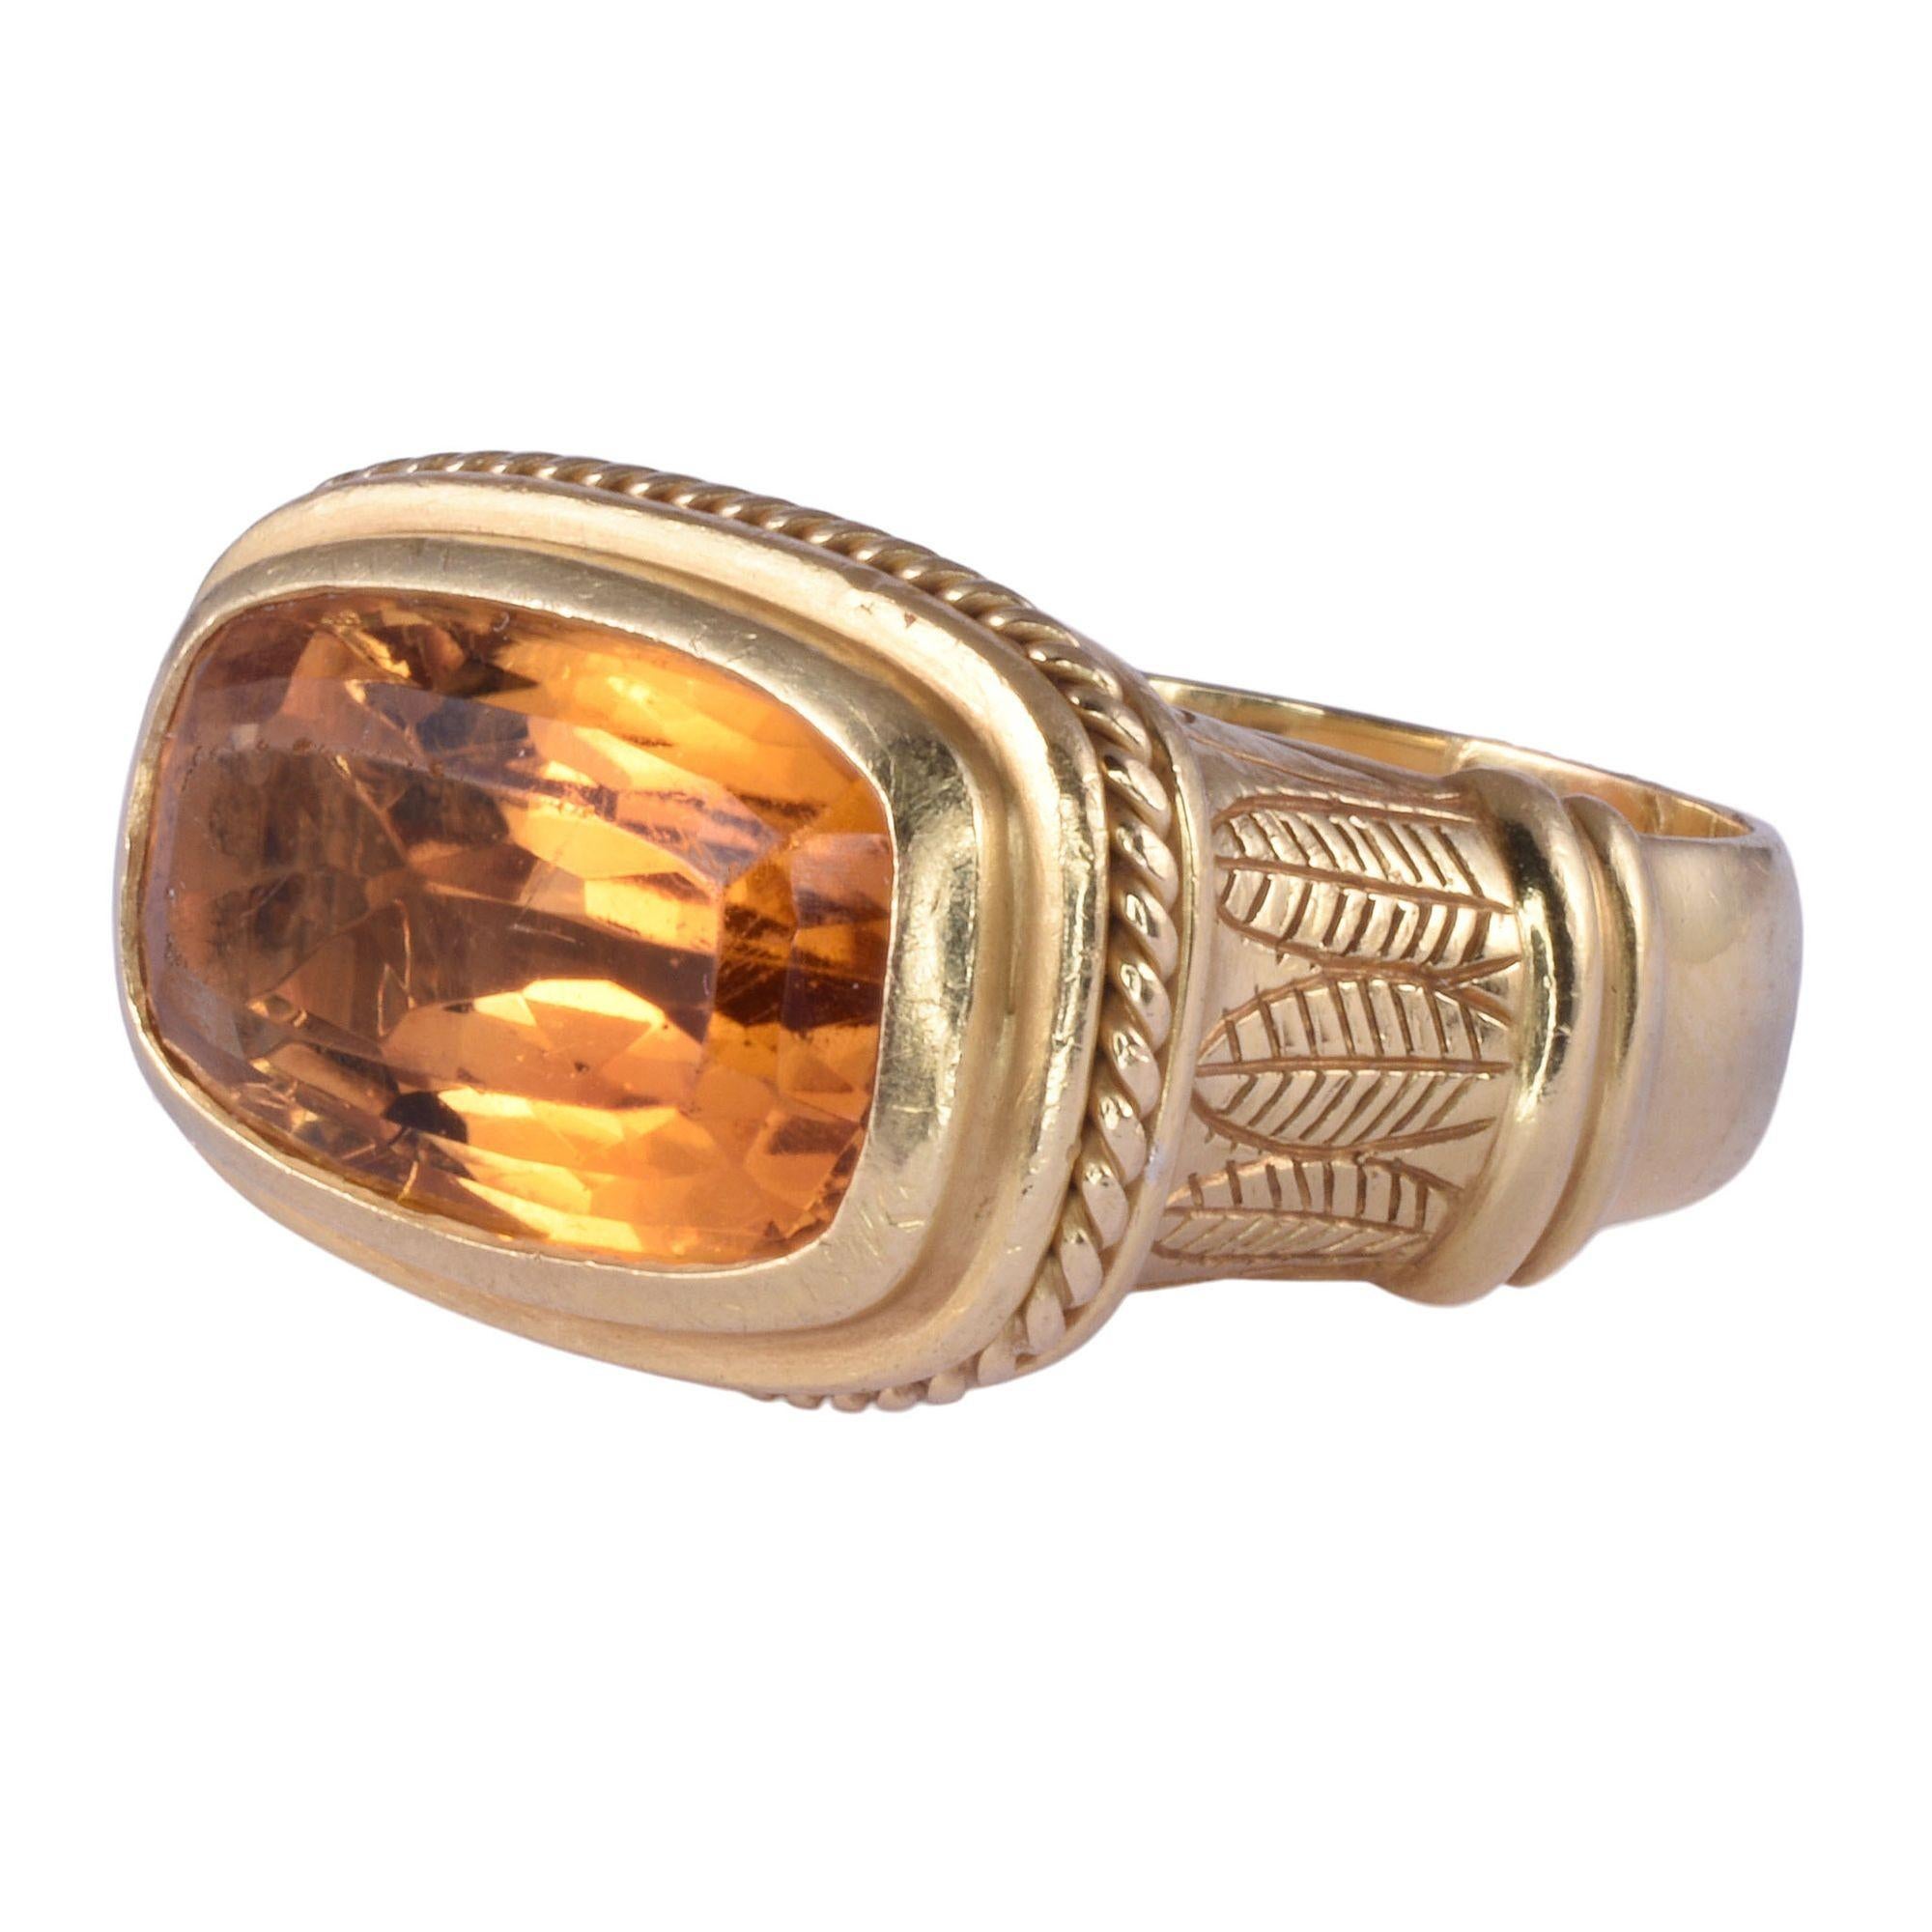 Estate Egyptian motif citrine 18K gold ring. This hand engraved Egyptian motif ring is crafted in 18 karat yellow gold and features a cushion cut citrine at 9.50 carats. This citrine ring is a size 8.25. [KIMH 615]